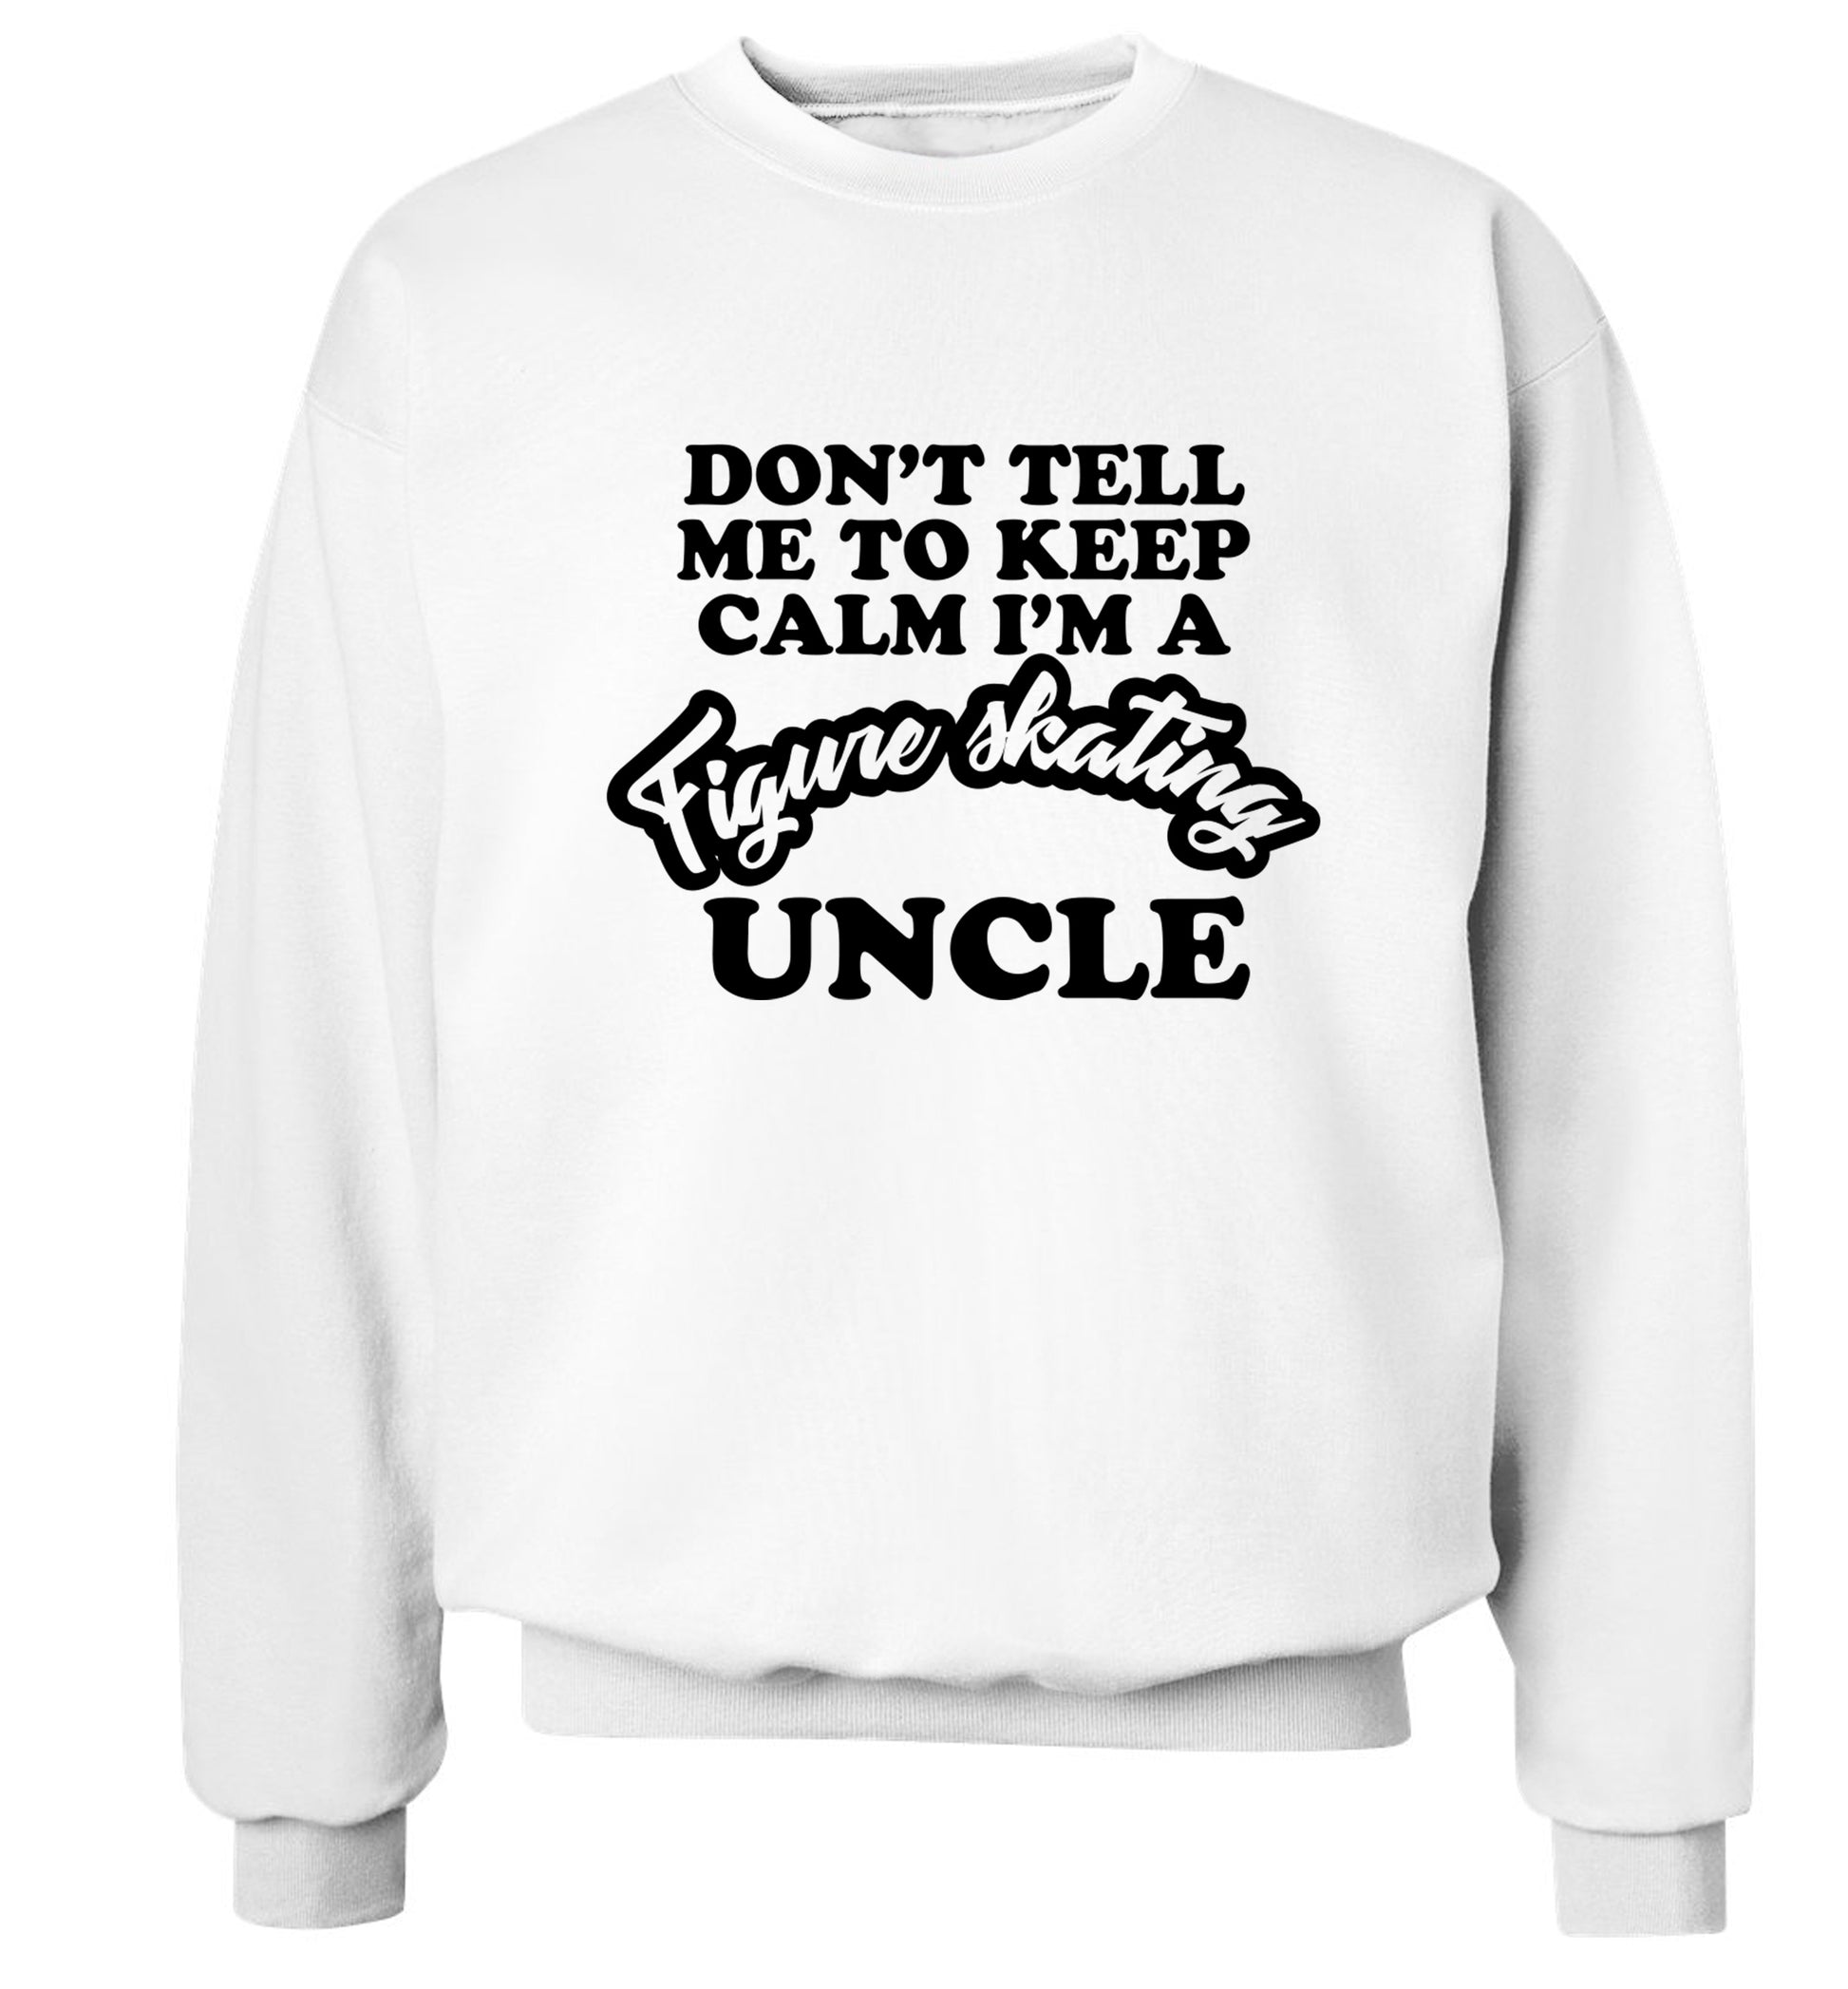 Don't tell me to keep calm I'm a figure skating uncle Adult's unisexwhite Sweater 2XL